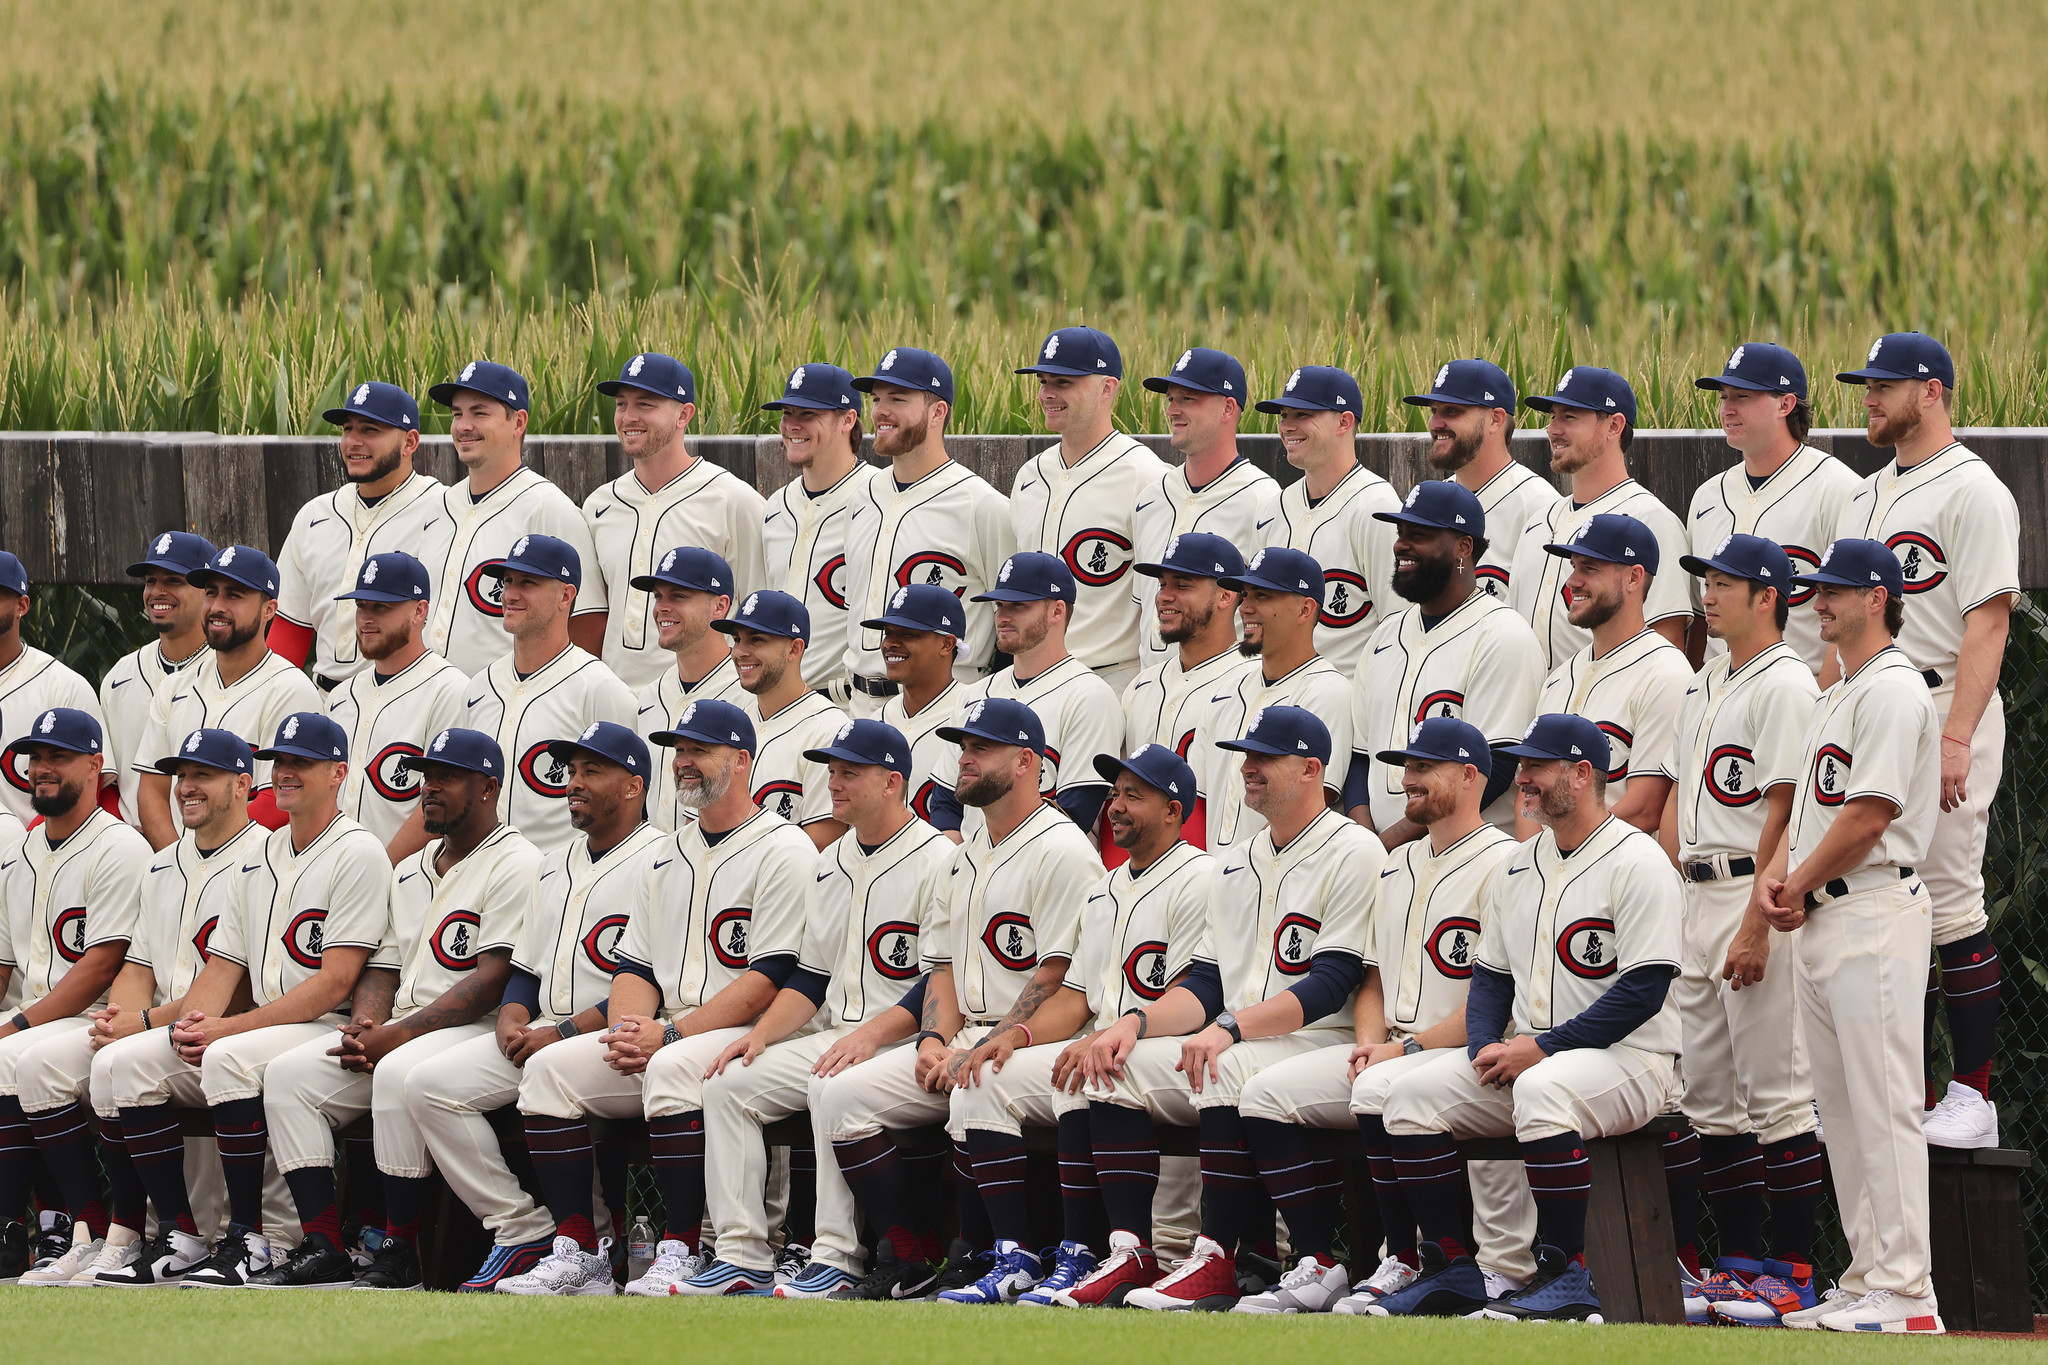 Cubs Field Of Dreams Jersey, Chicago Cubs Field of Dreams